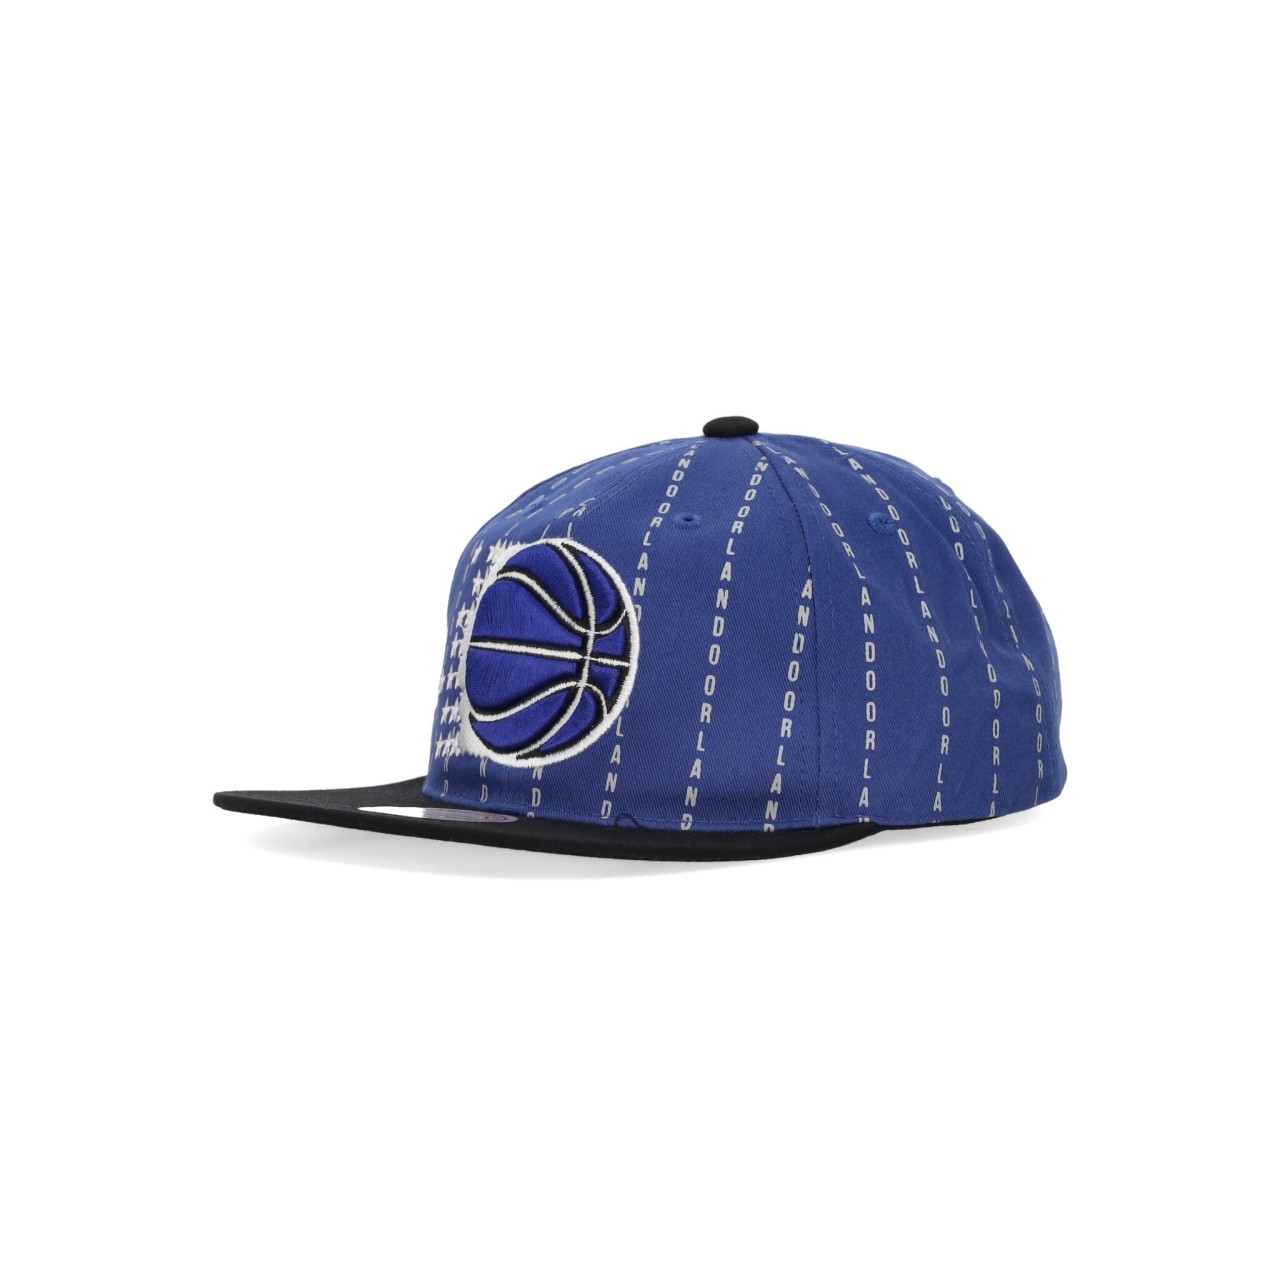 MITCHELL & NESS NBA CITY PINSTRIPE DEADSTOCK HWC ORLMAG HMUS5802-OMAYYPPPBLUE